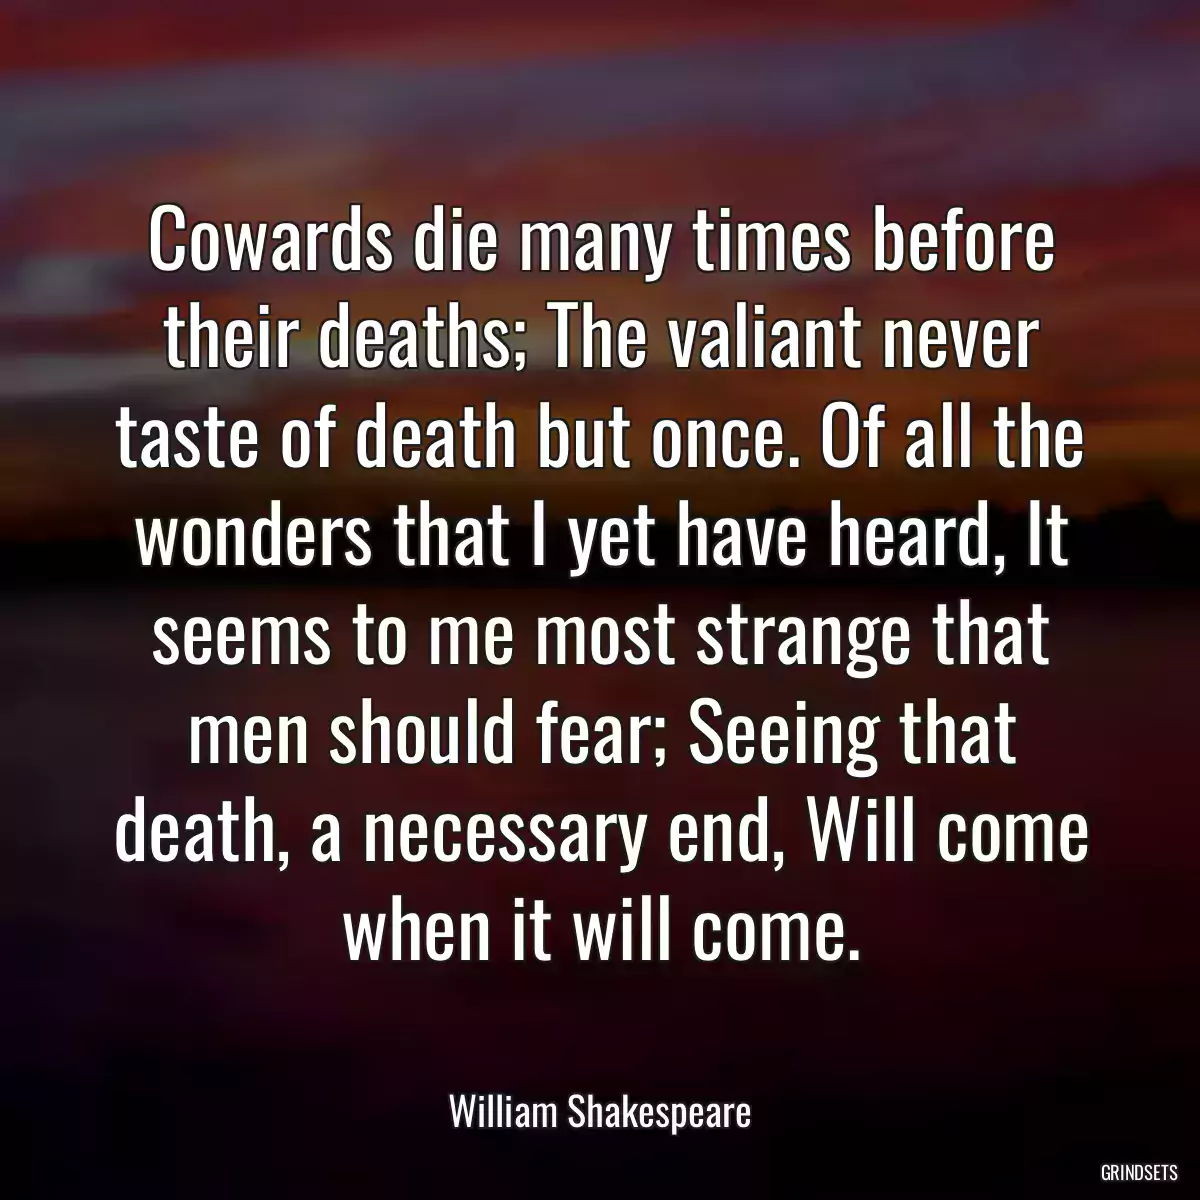 Cowards die many times before their deaths; The valiant never taste of death but once. Of all the wonders that I yet have heard, It seems to me most strange that men should fear; Seeing that death, a necessary end, Will come when it will come.